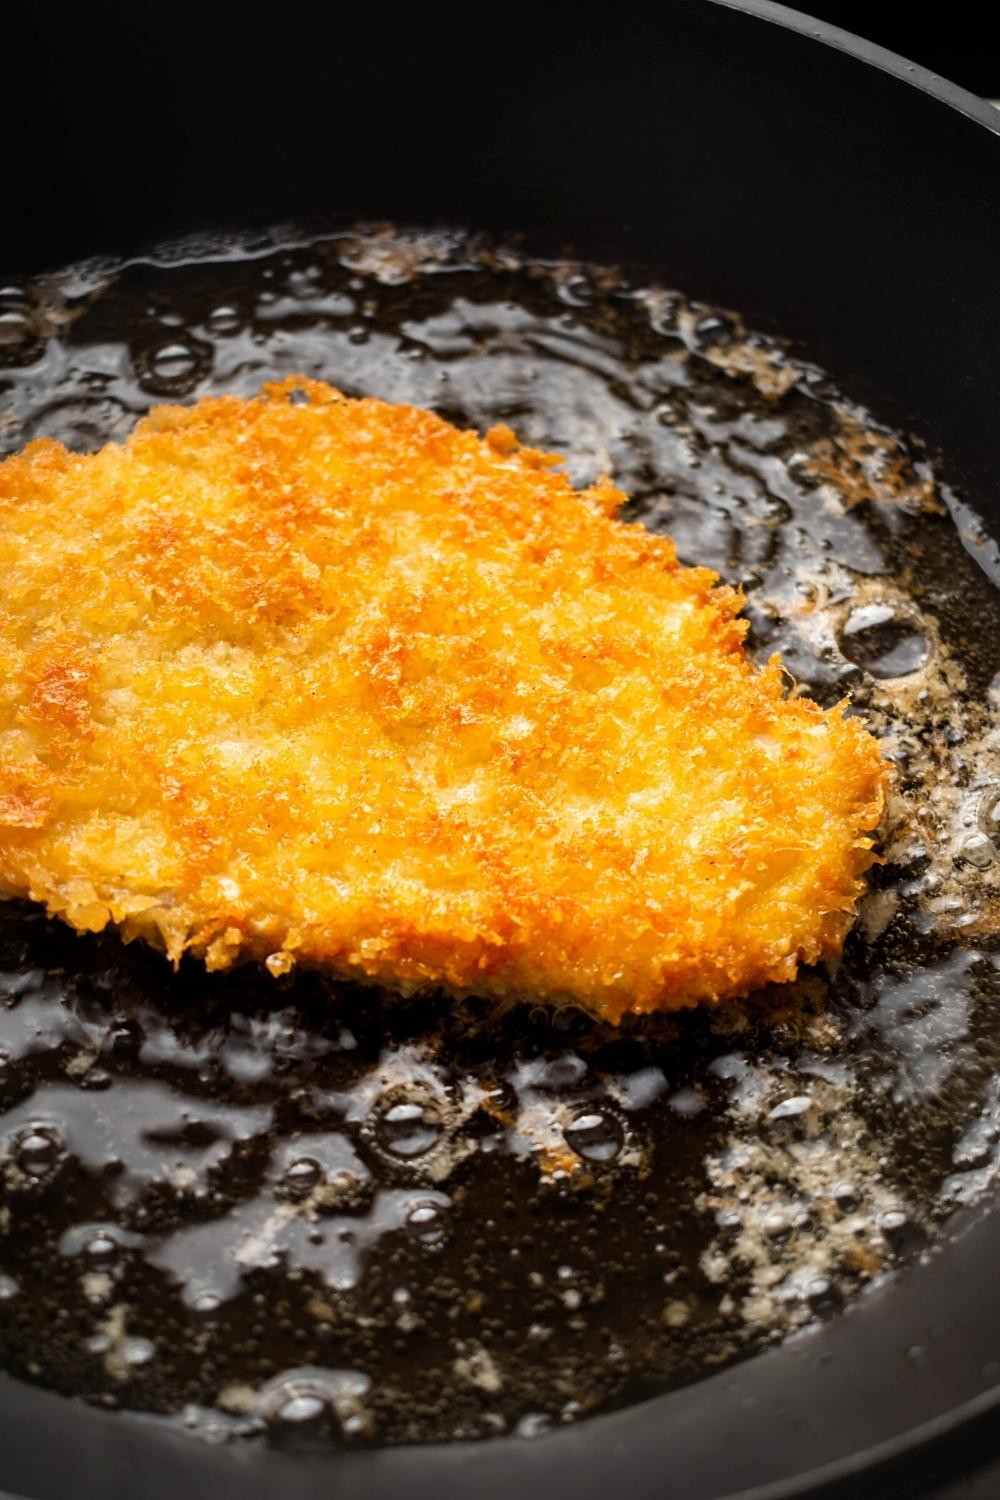 A breaded chicken cutlet that is cooked to Golden perfection in oil in a pan.